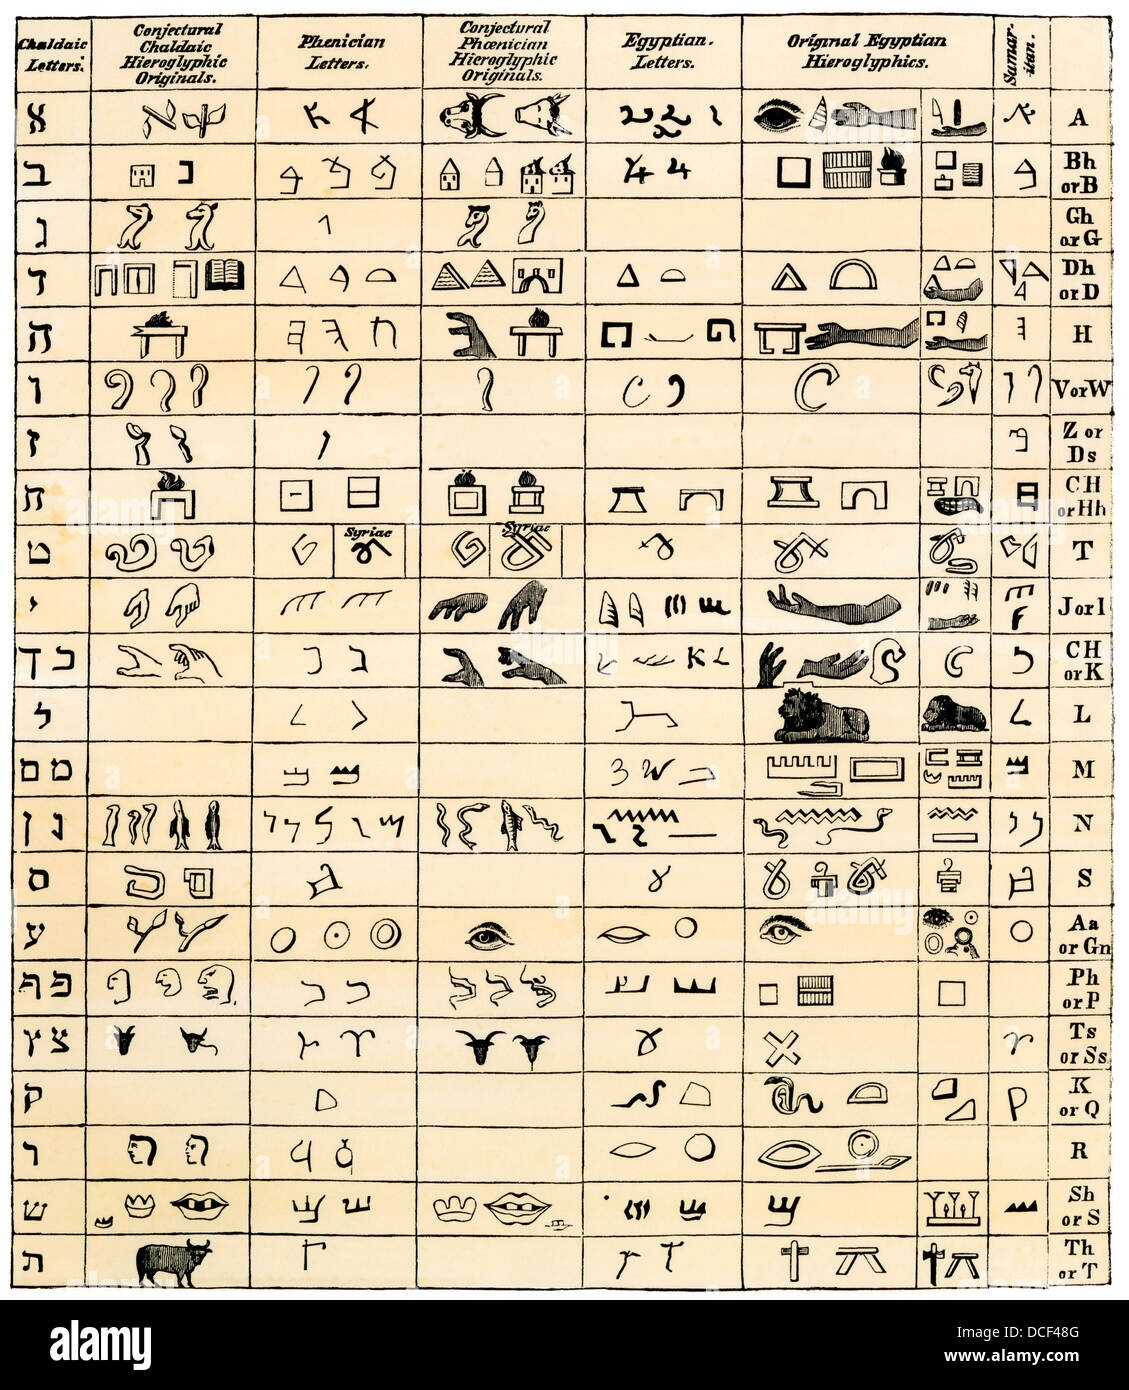 ancient alphabets and hieroglyphic characters explained